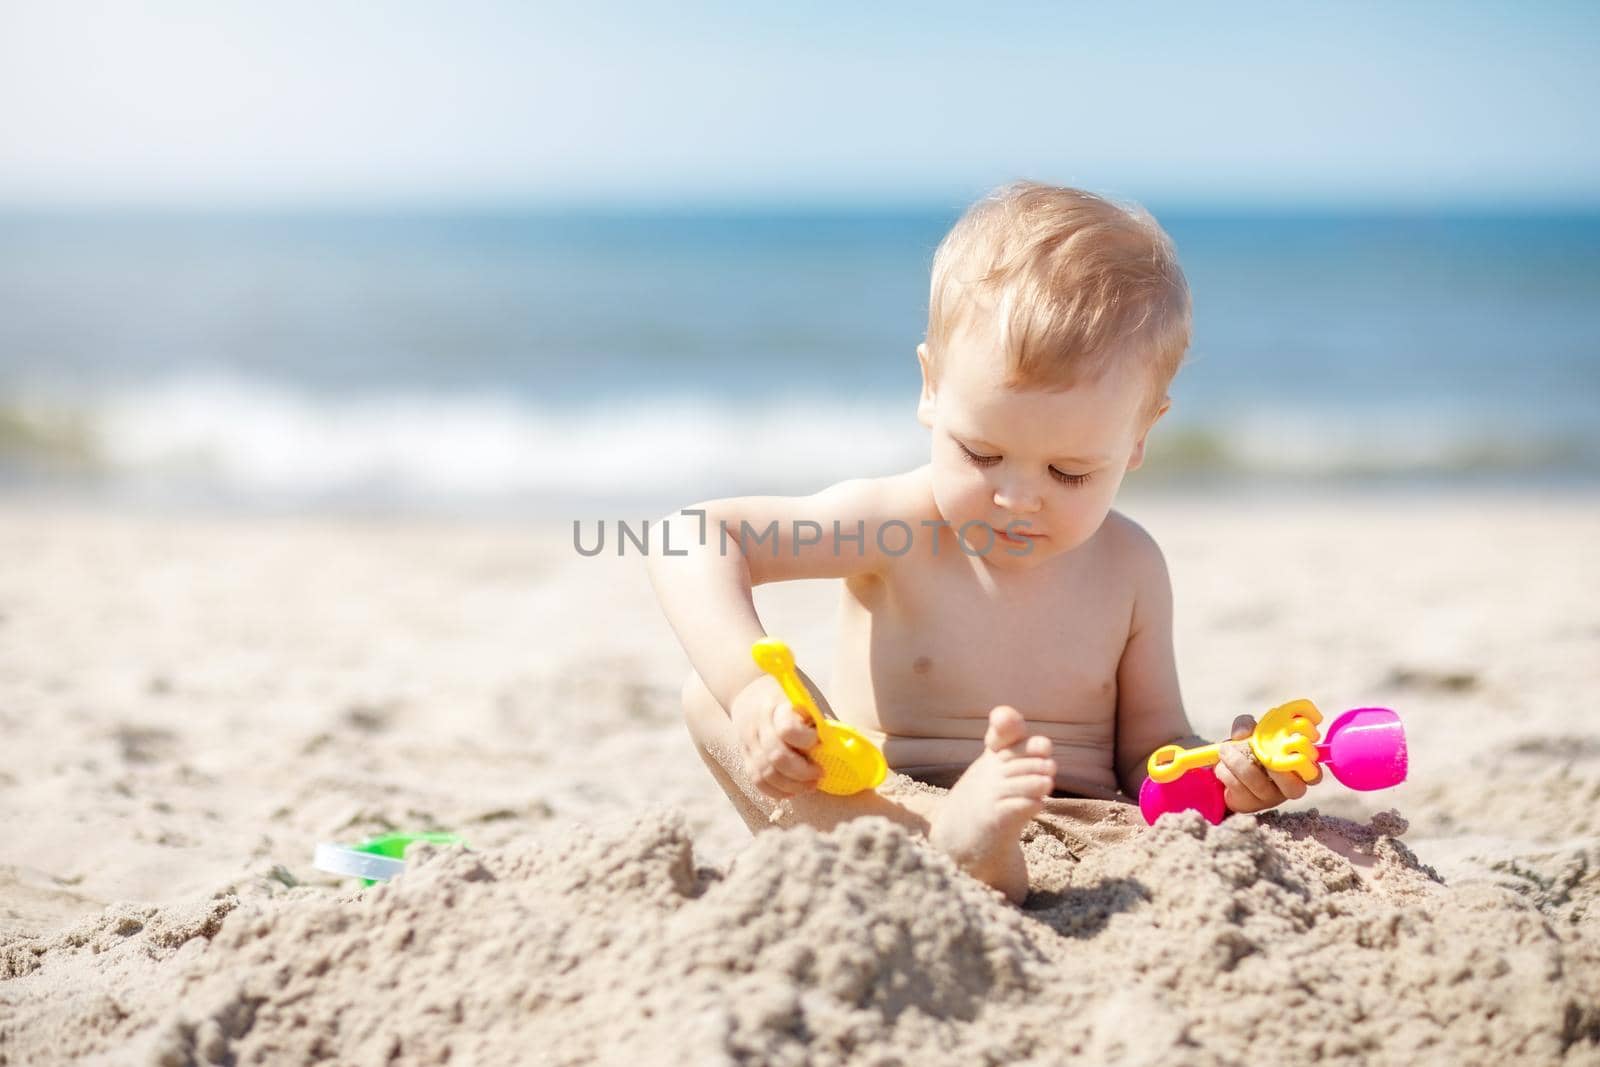 The little boy in the beach, is experimenting with sand trying to pour it on his feet. Holidays by the sea are a great pastime for children.